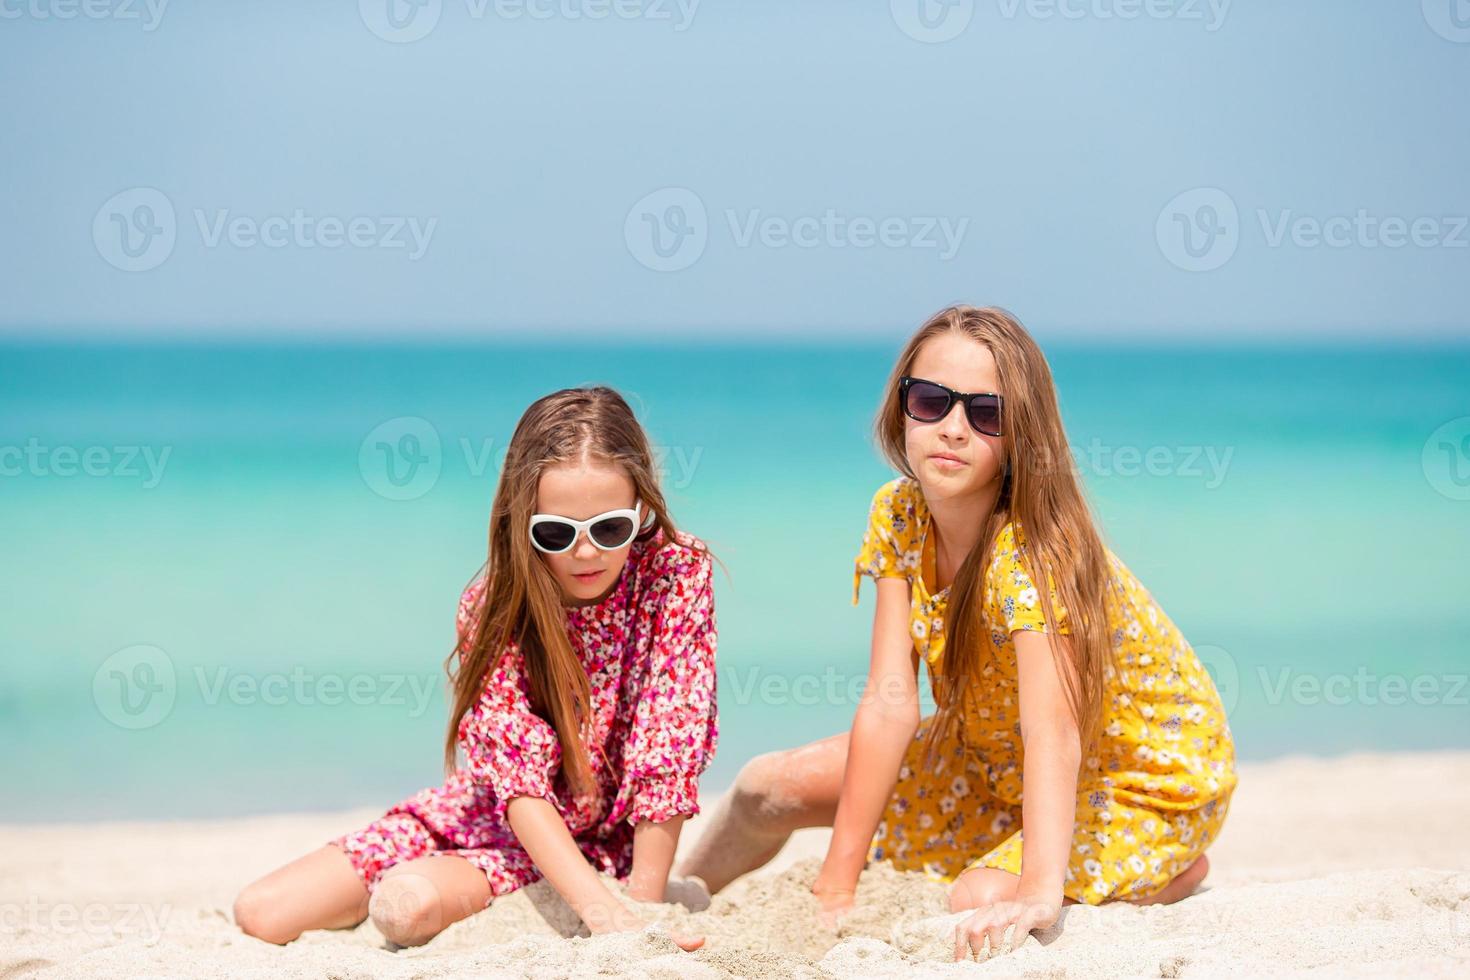 Little happy funny girls have a lot of fun at tropical beach playing together. photo